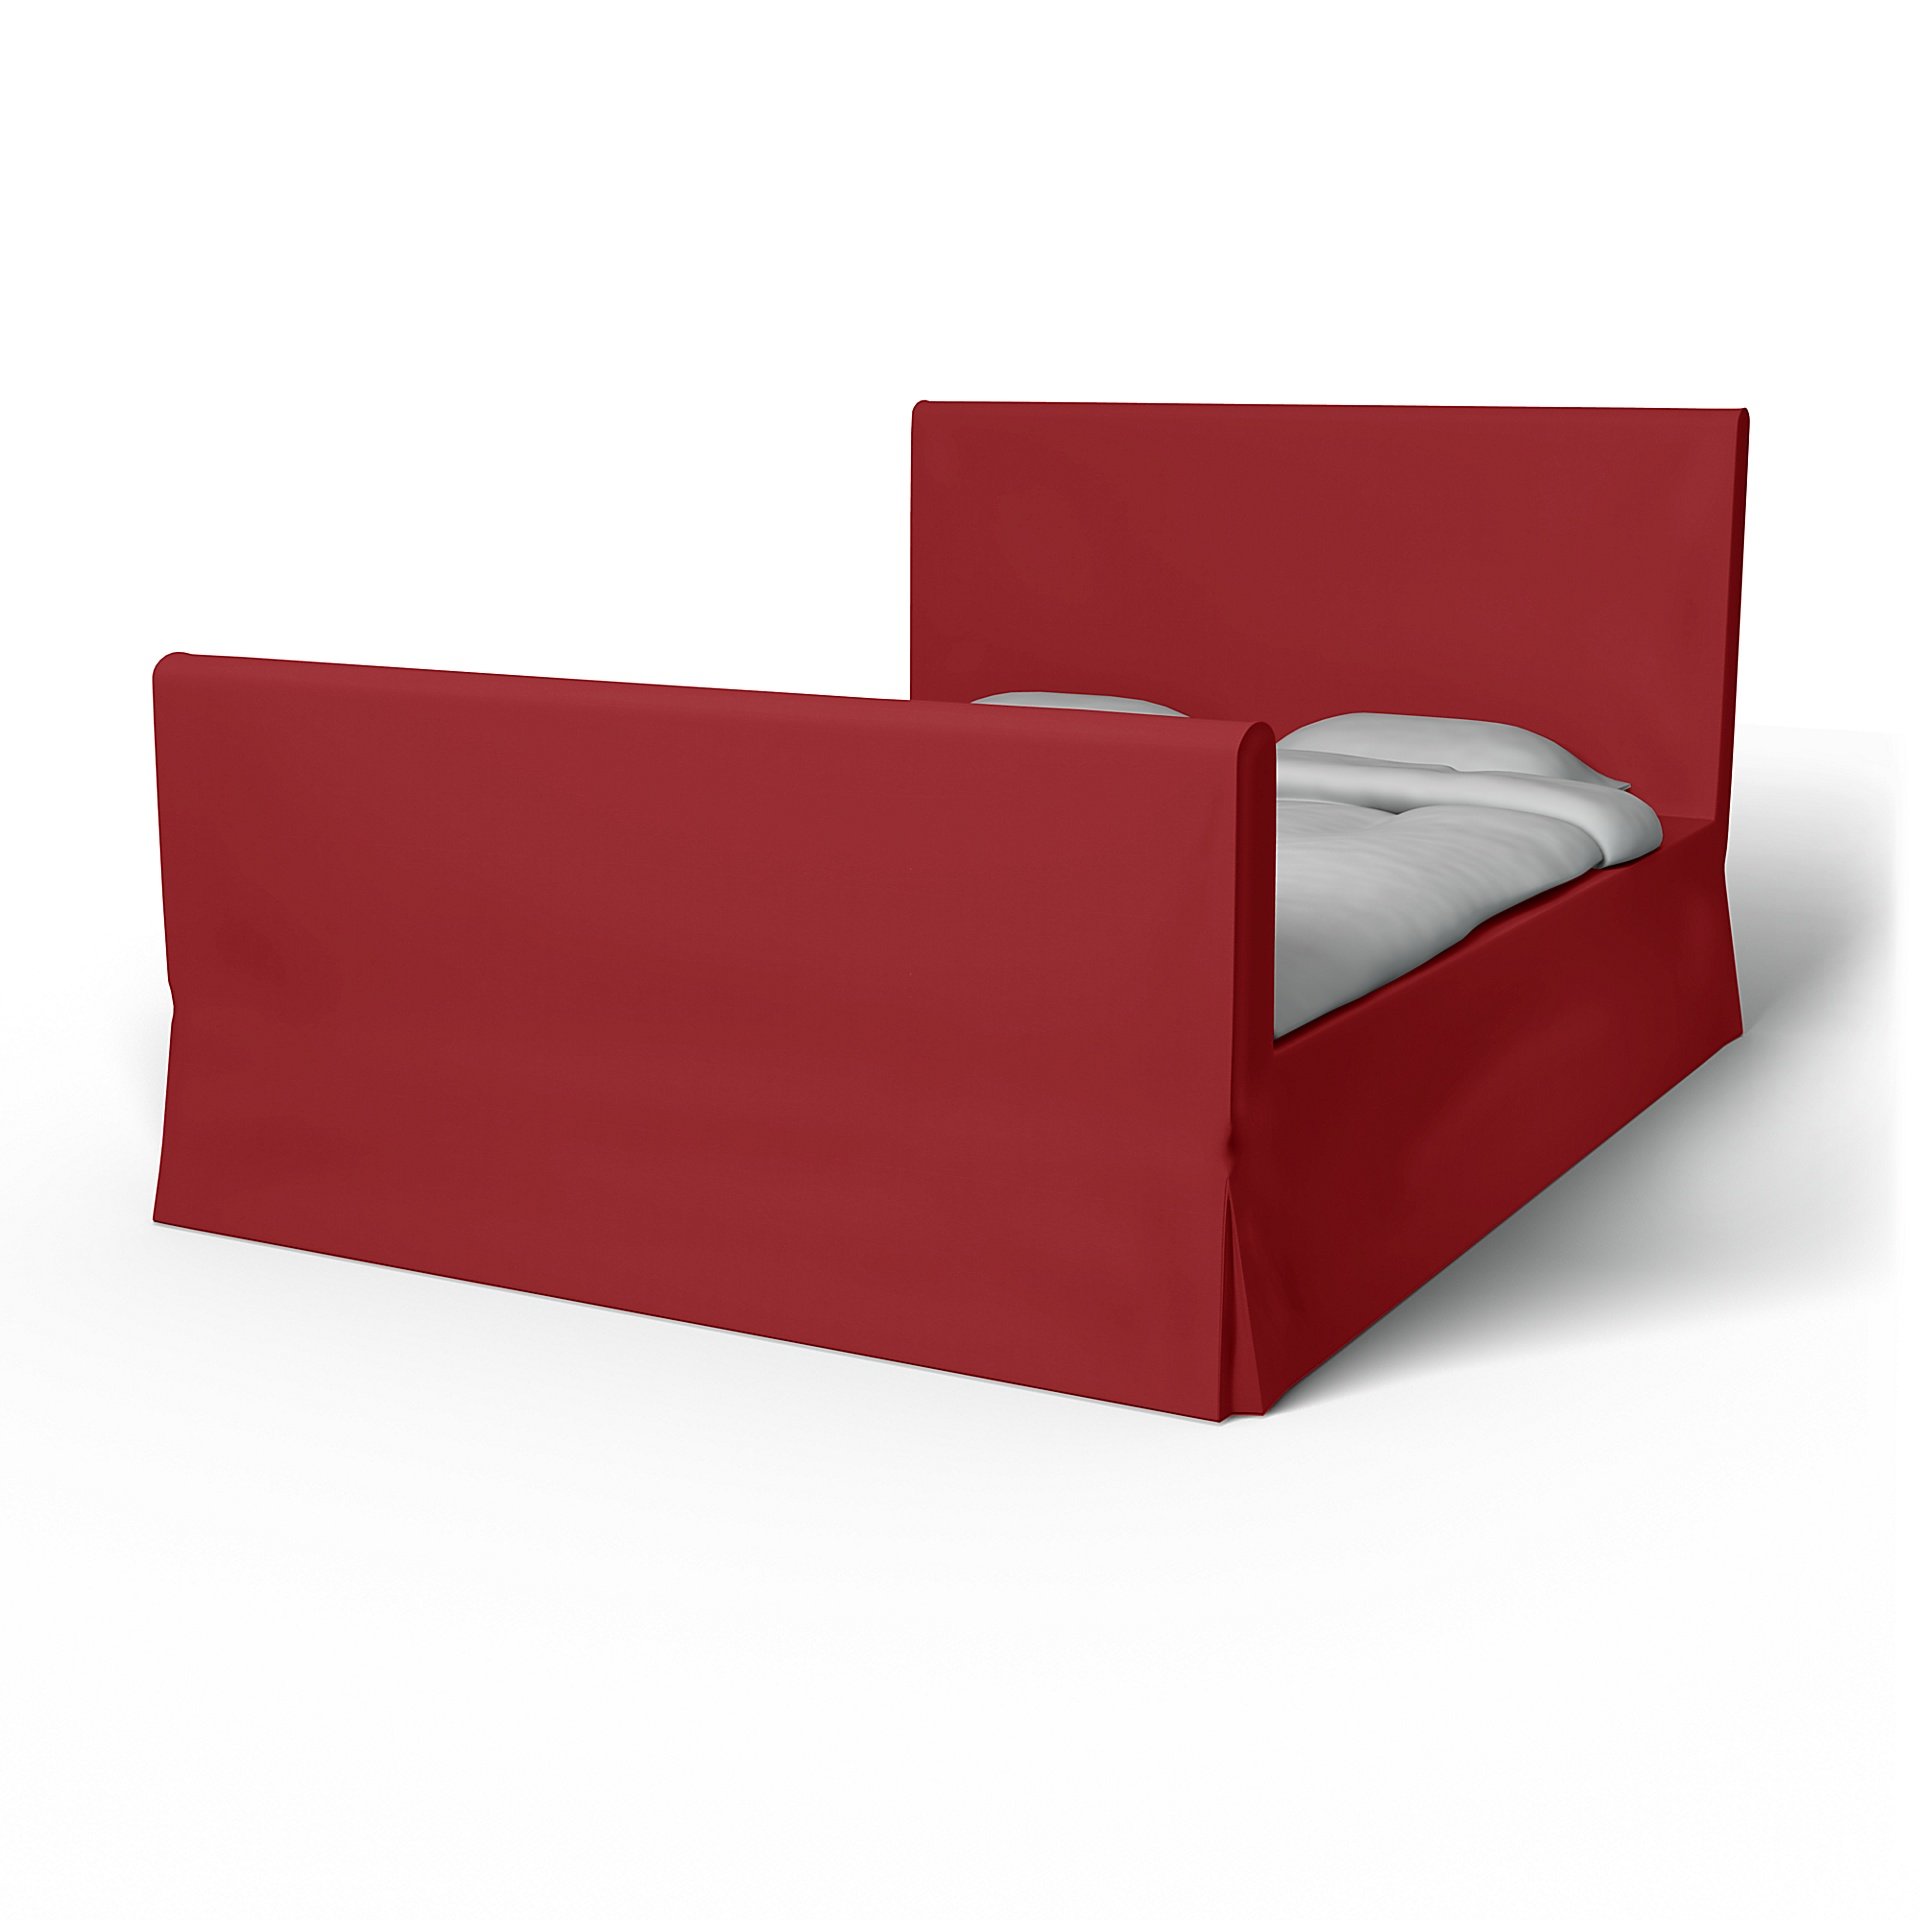 IKEA - Floro Bed Frame Cover, Scarlet Red, Cotton - Bemz